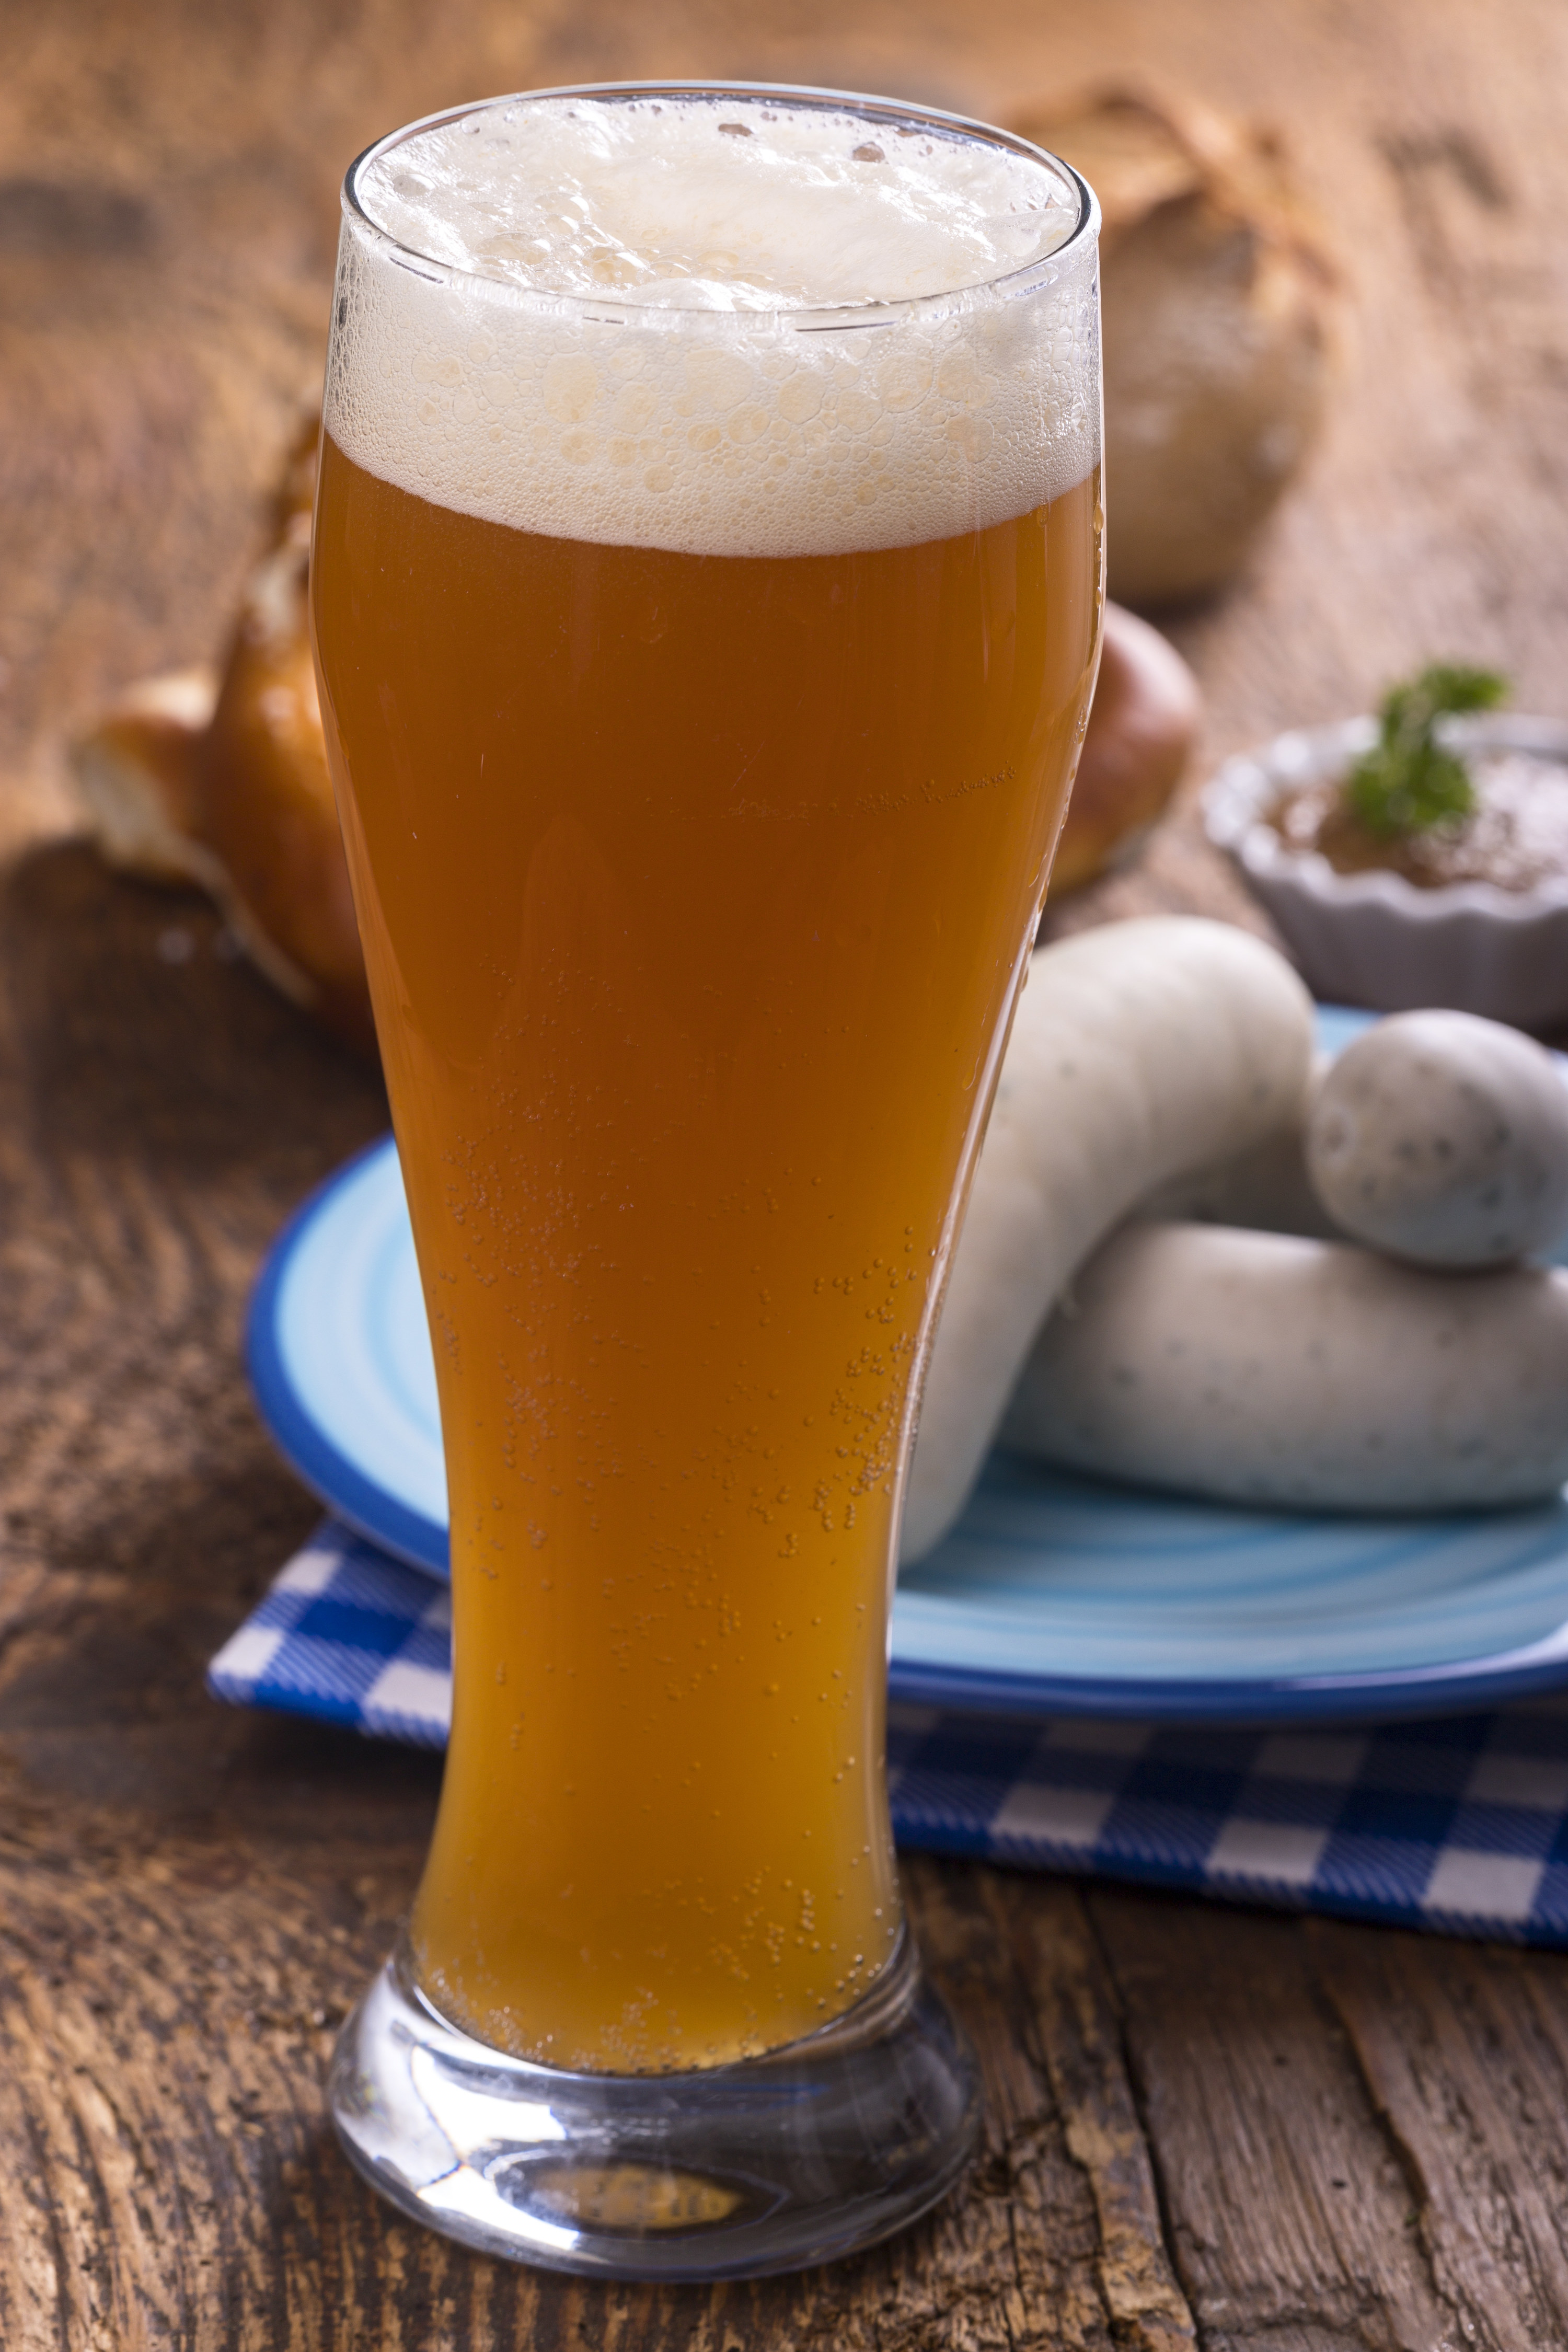 Glass of traditional German wheat beer, with checkered blue towelette in background